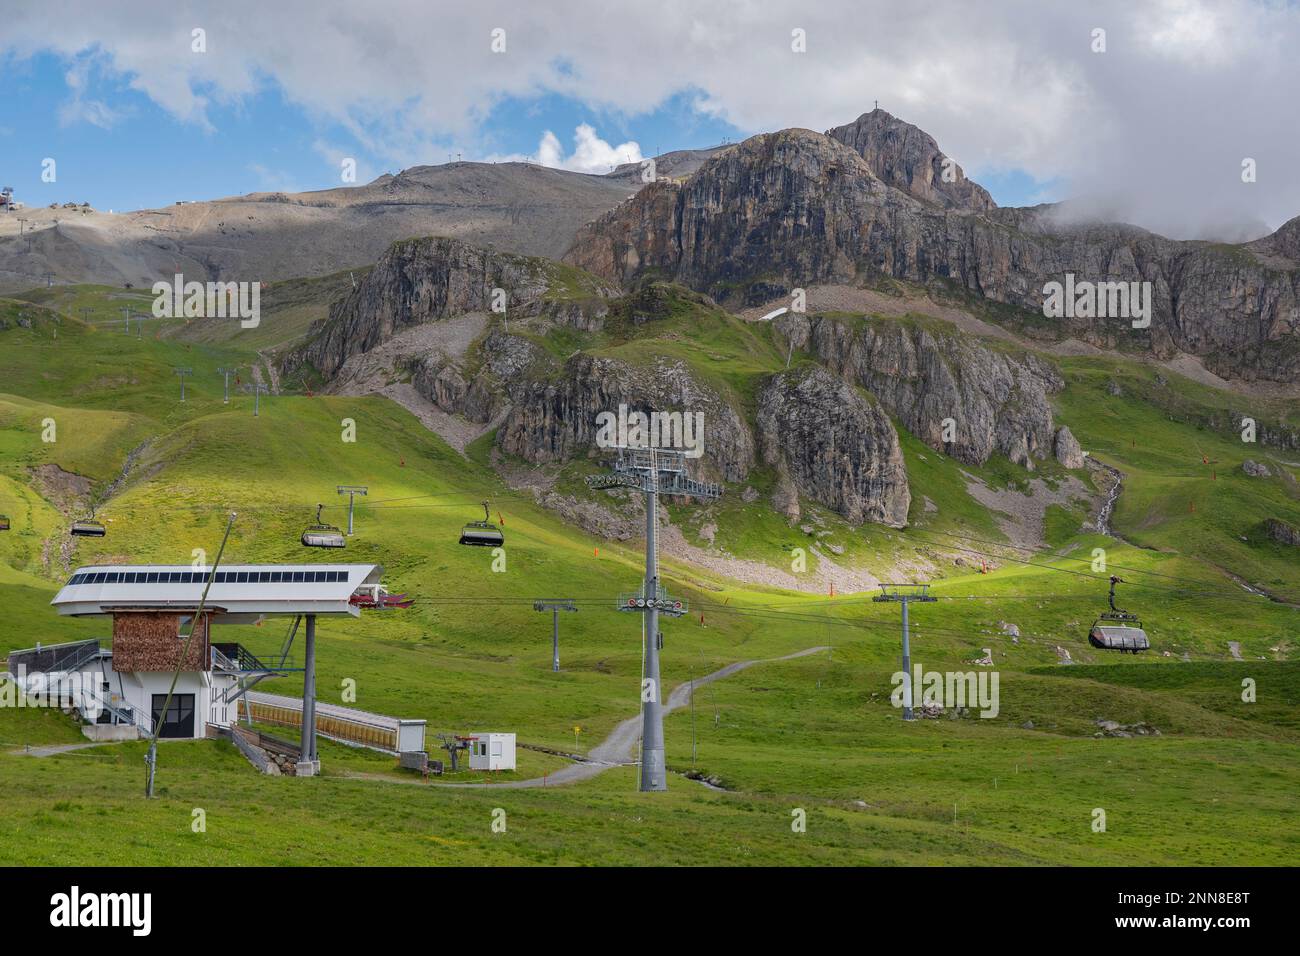 Summer in the Silvretta Arena in Ischgl. With chairlifts at the Idalp and the high rock formations. You can see the yellow snow cannons in the background. Stock Photo